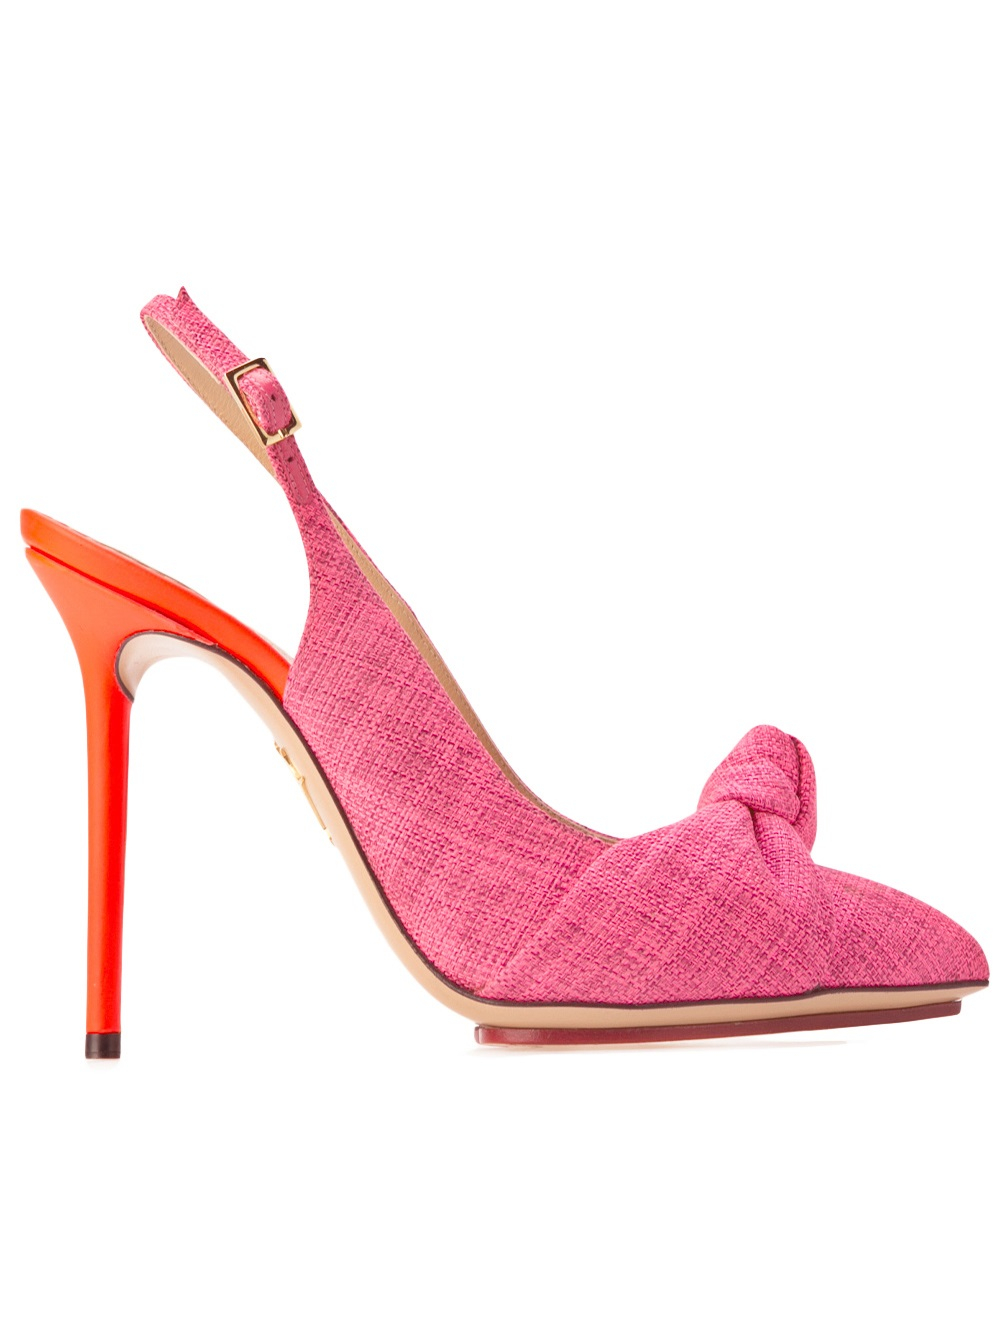 Lyst - Charlotte olympia Ava Pump in Pink